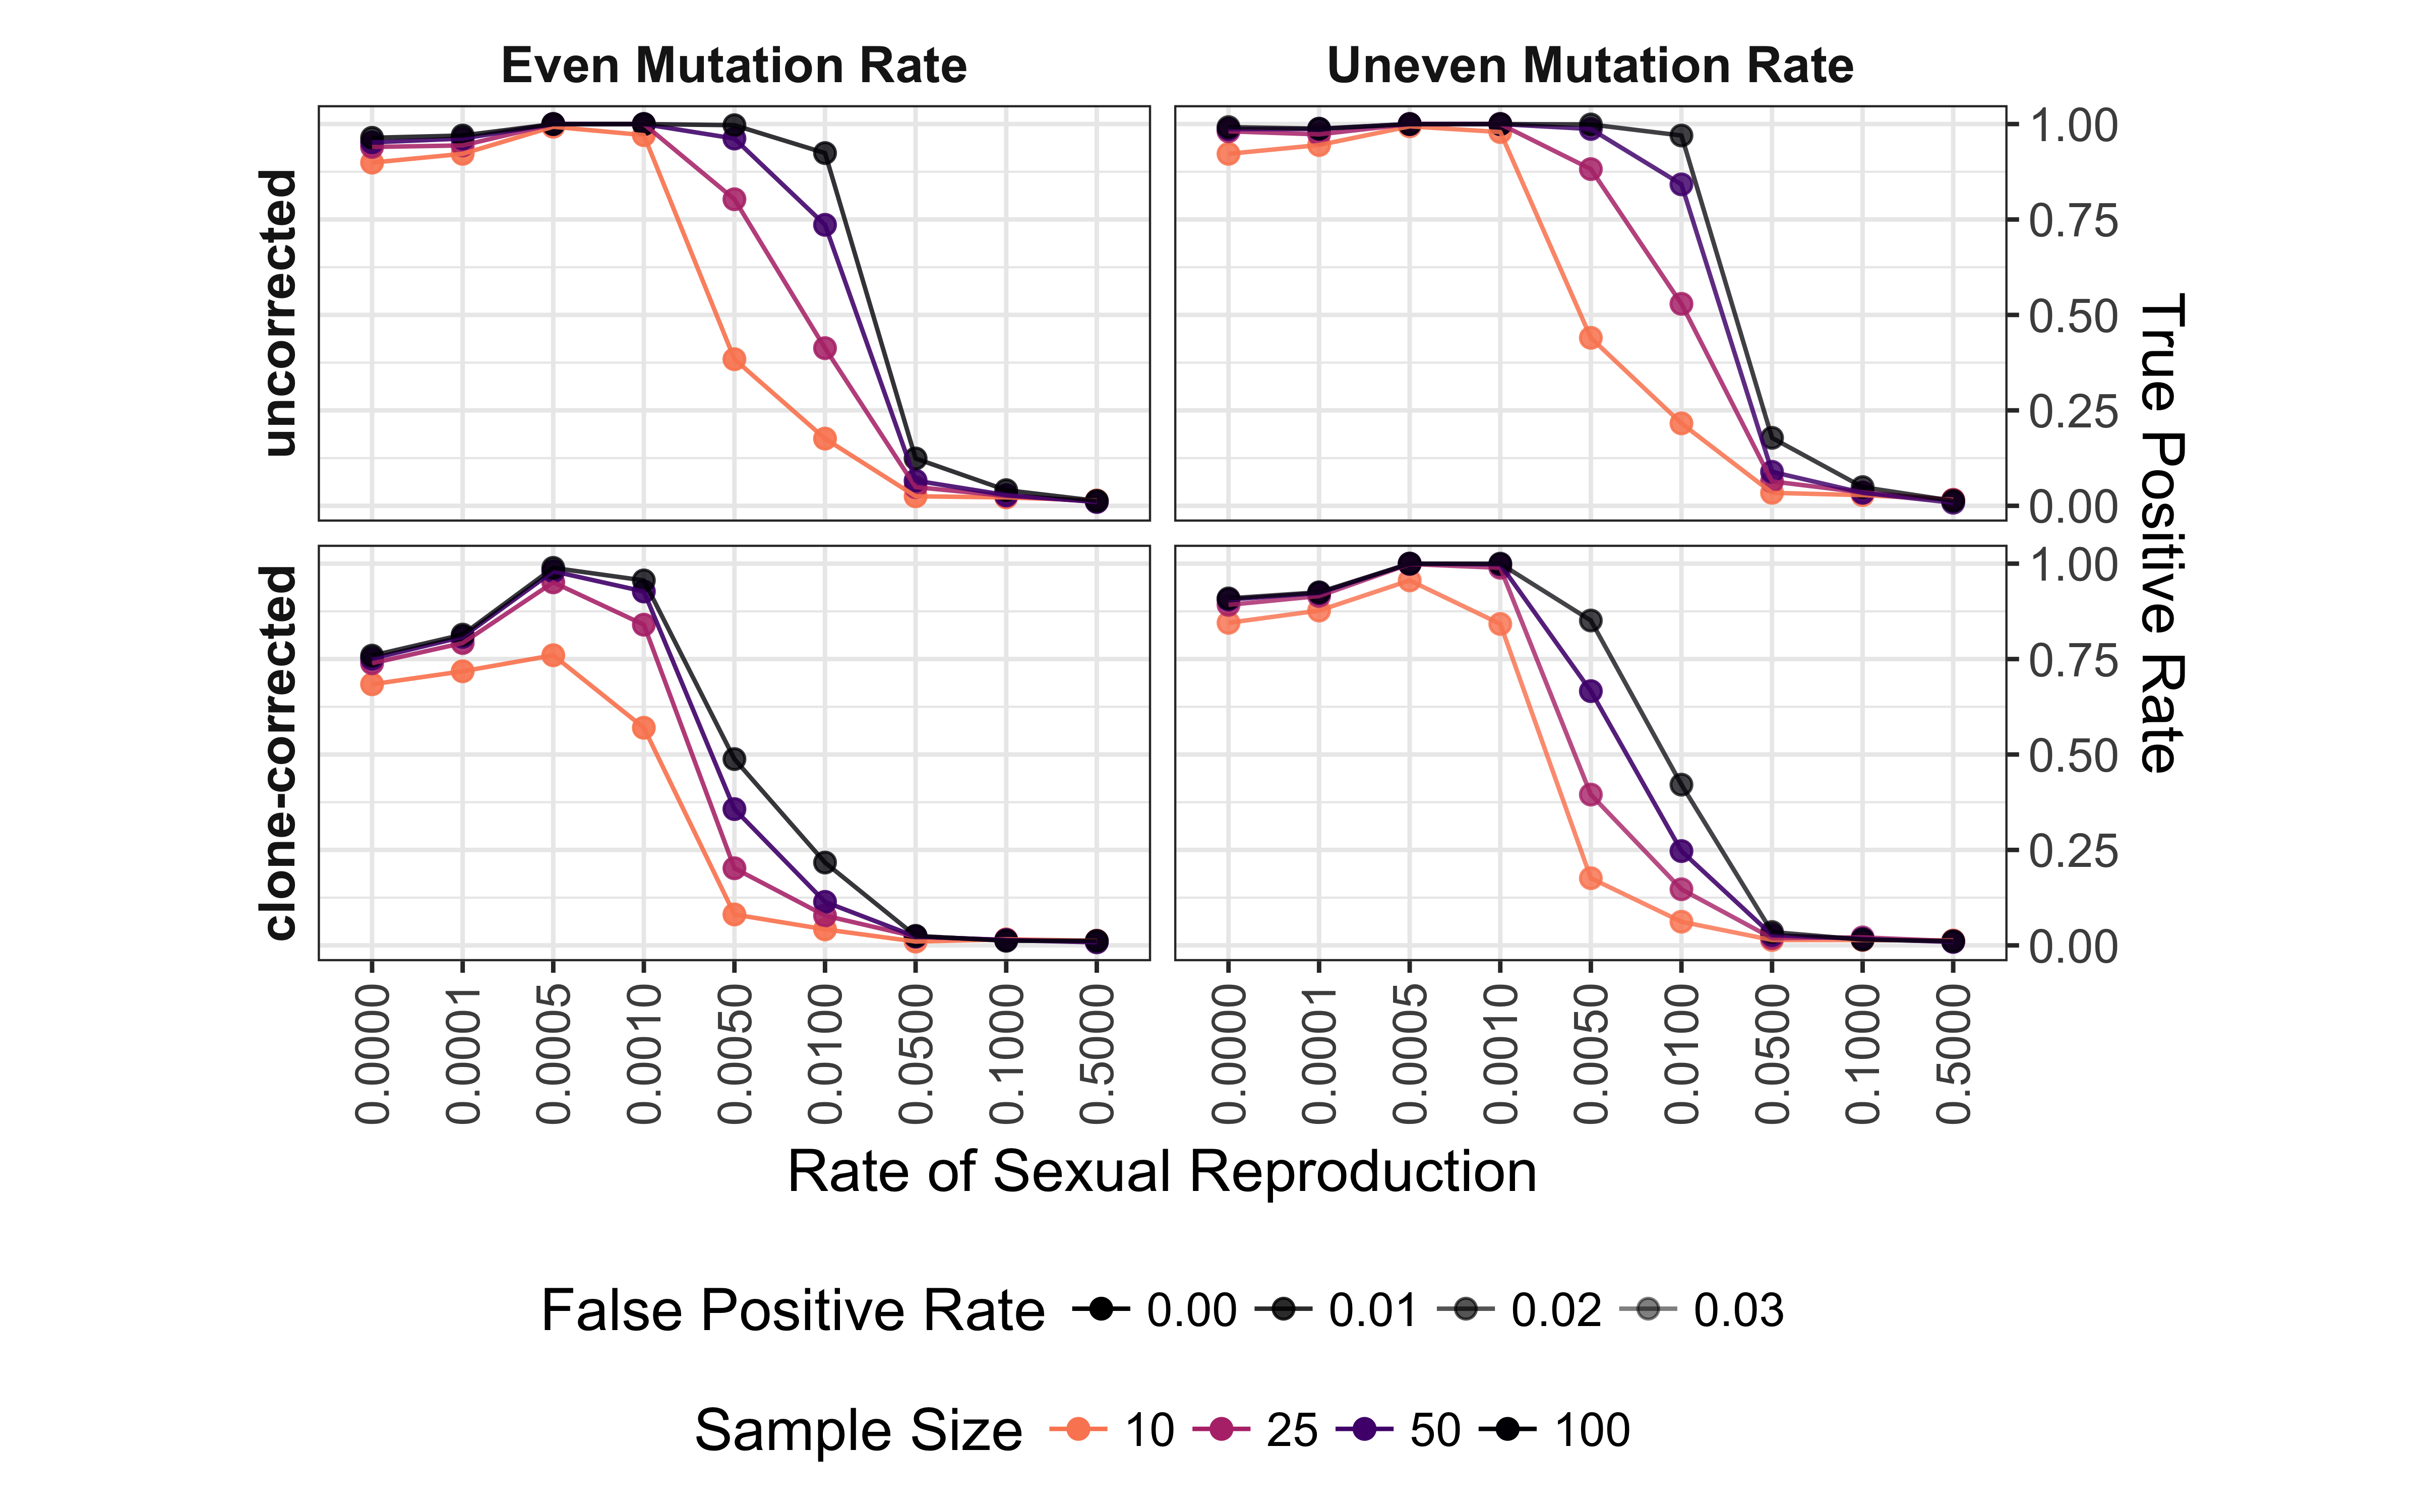 Effect of rate of sexual reproduction, sample size (n), mutation rate,
and clone-correction on the power of permutation analysis for microsatellite
data. Power (true positive rate) is on the vertical axis. Values are shown for p
= 0.01. Plots are arranged in a grid with clone-correction in rows and mutation
rate in columns. Color indicates sample size.